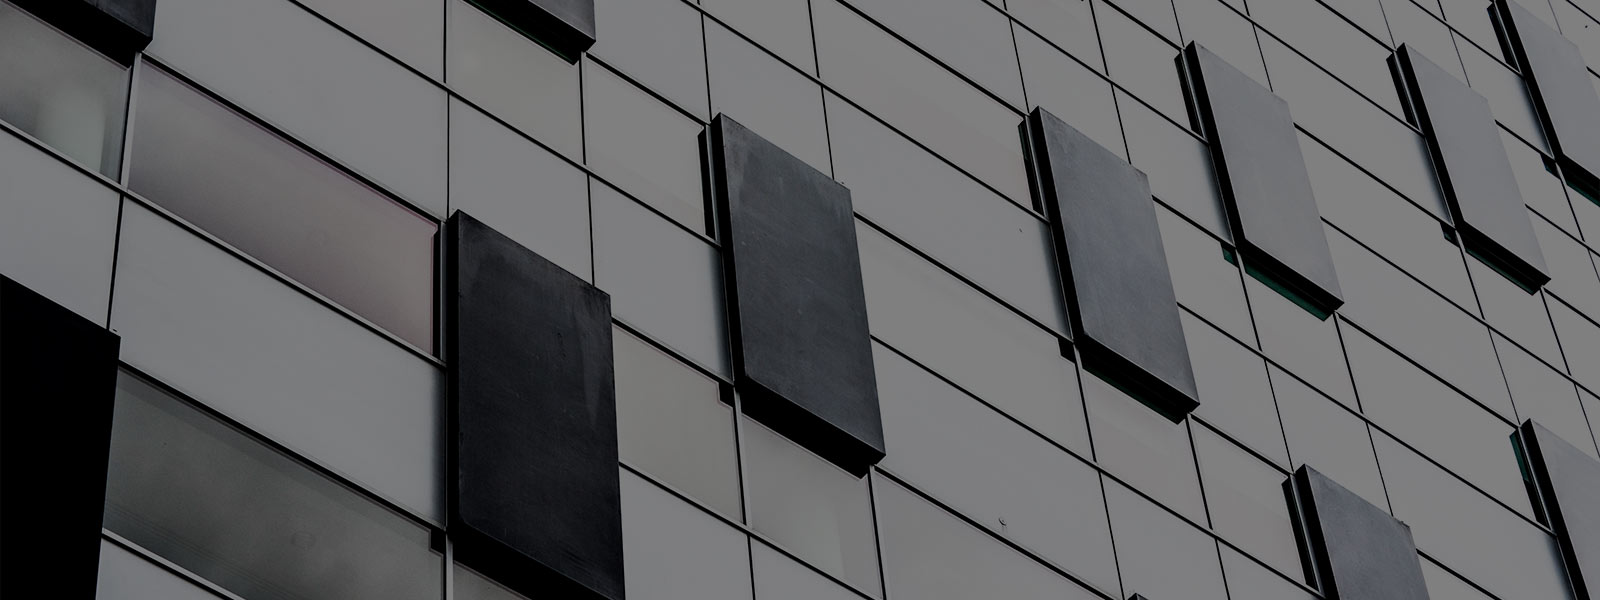 Detail of an abstract office building in Liverpool, England.